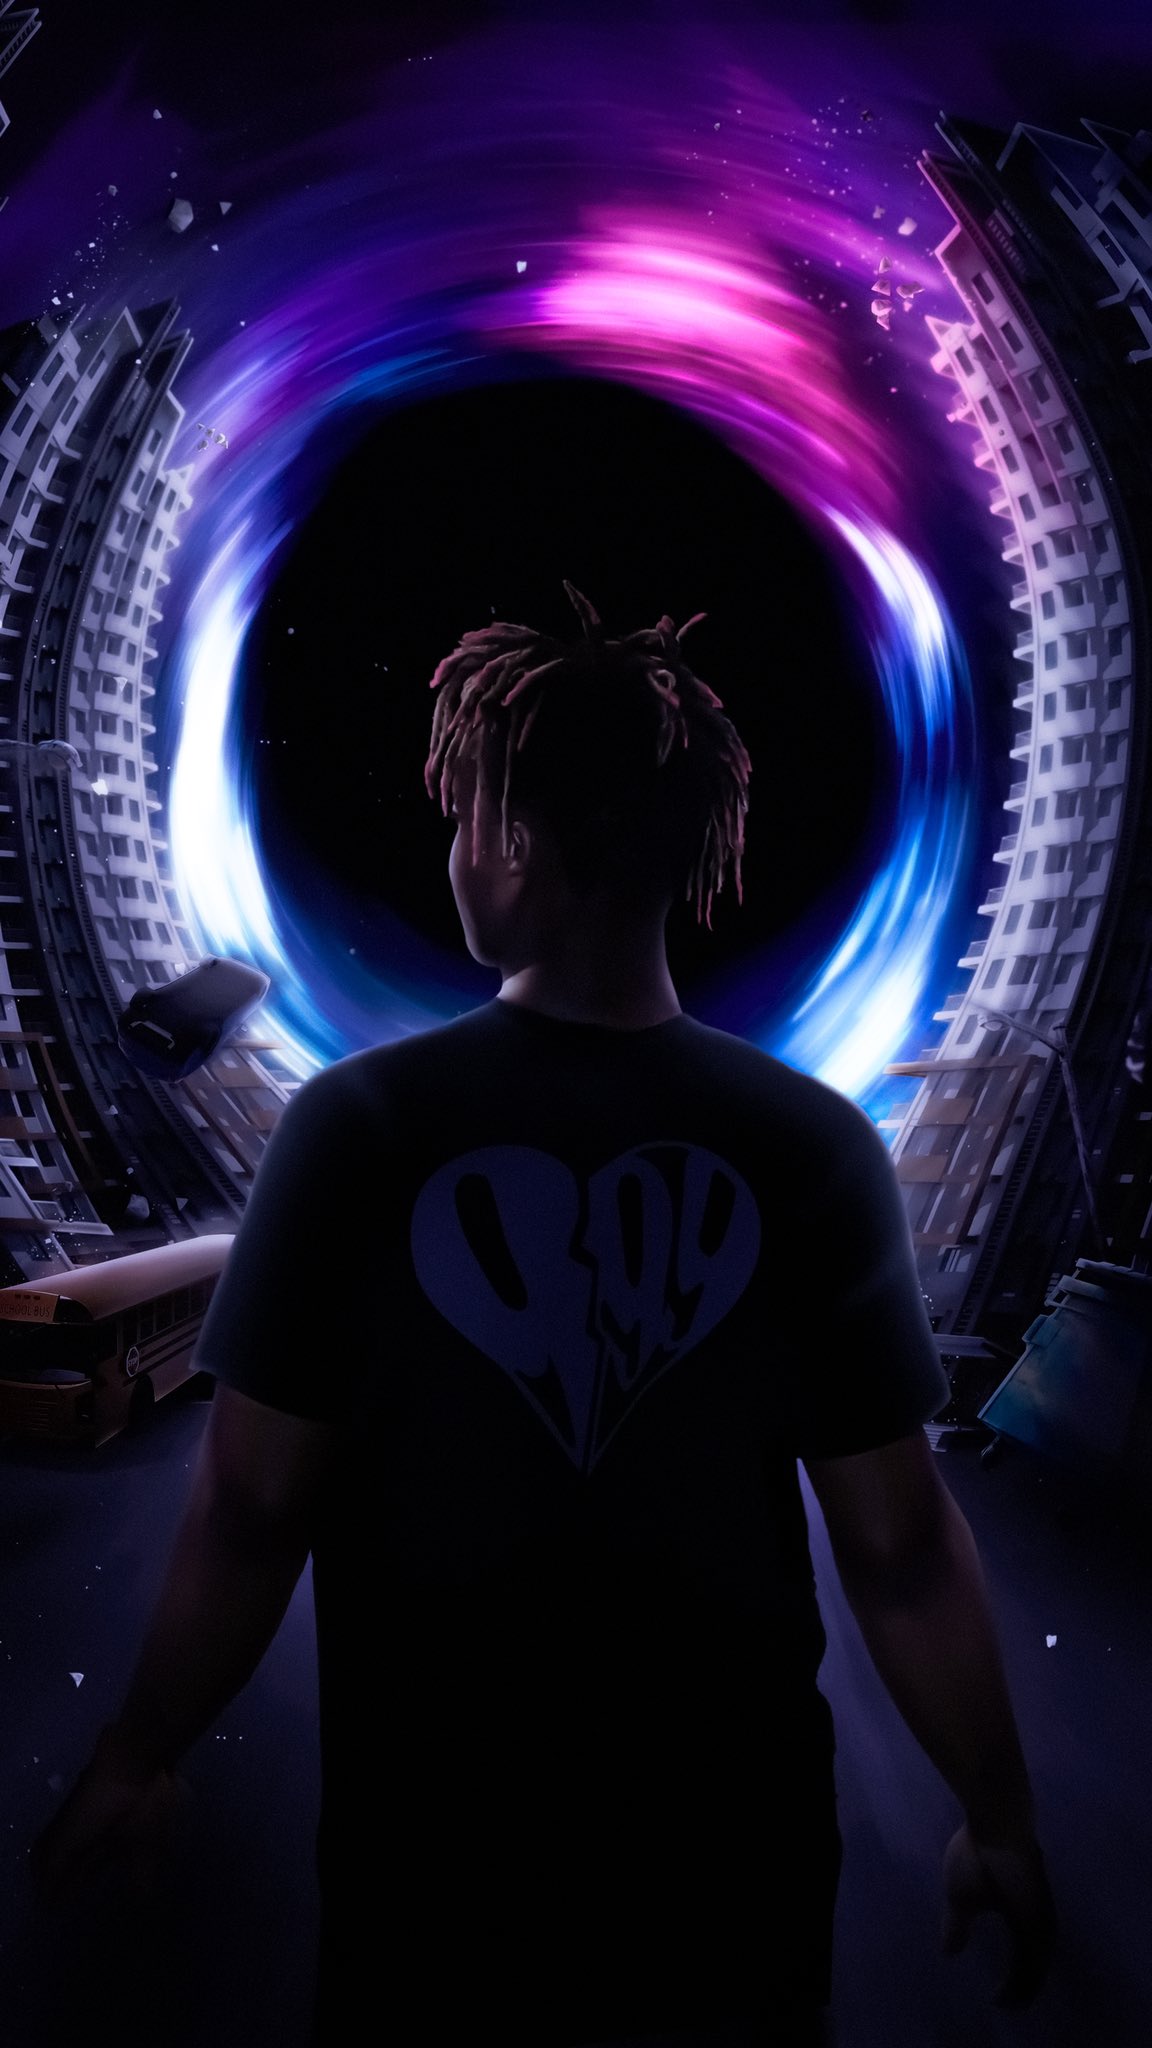 outlyning of my recent juice wrld art